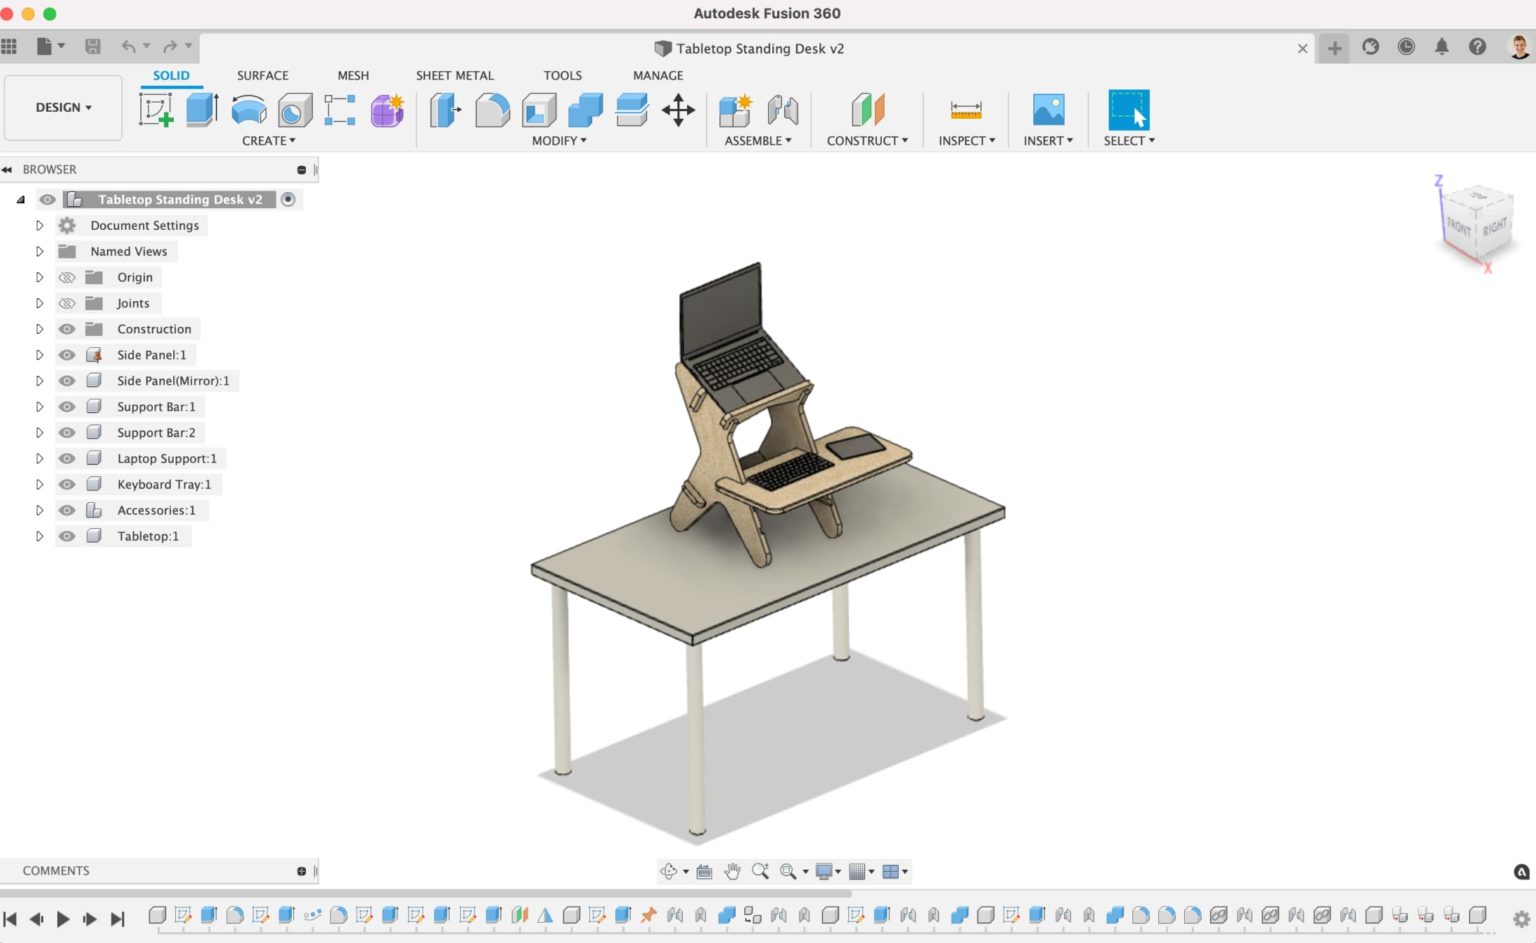 What type of modeling is Autodesk Fusion 360?